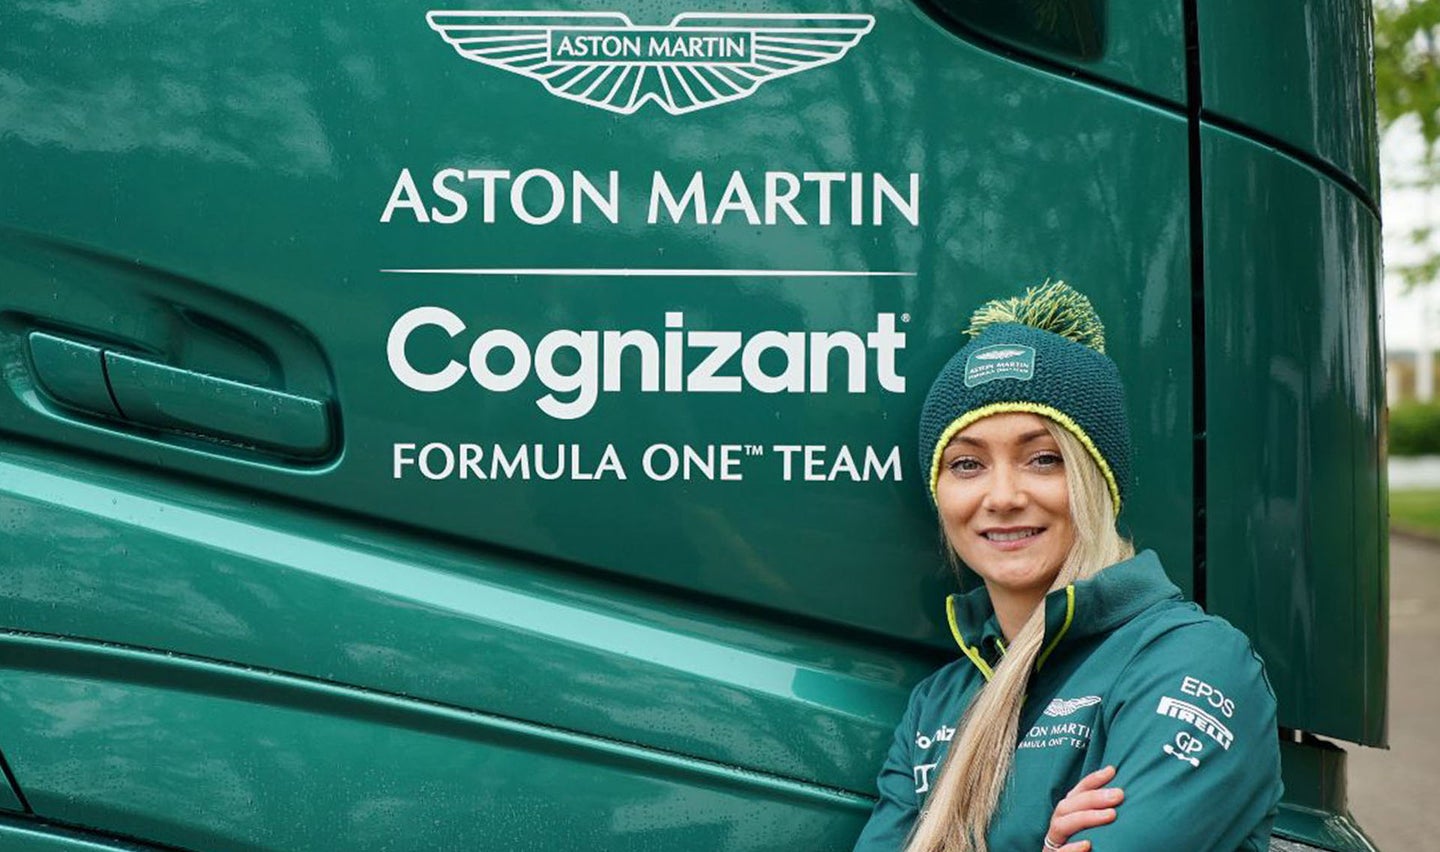 How a Stunt Driver Drifted Her Way Into Working With an F1 Team